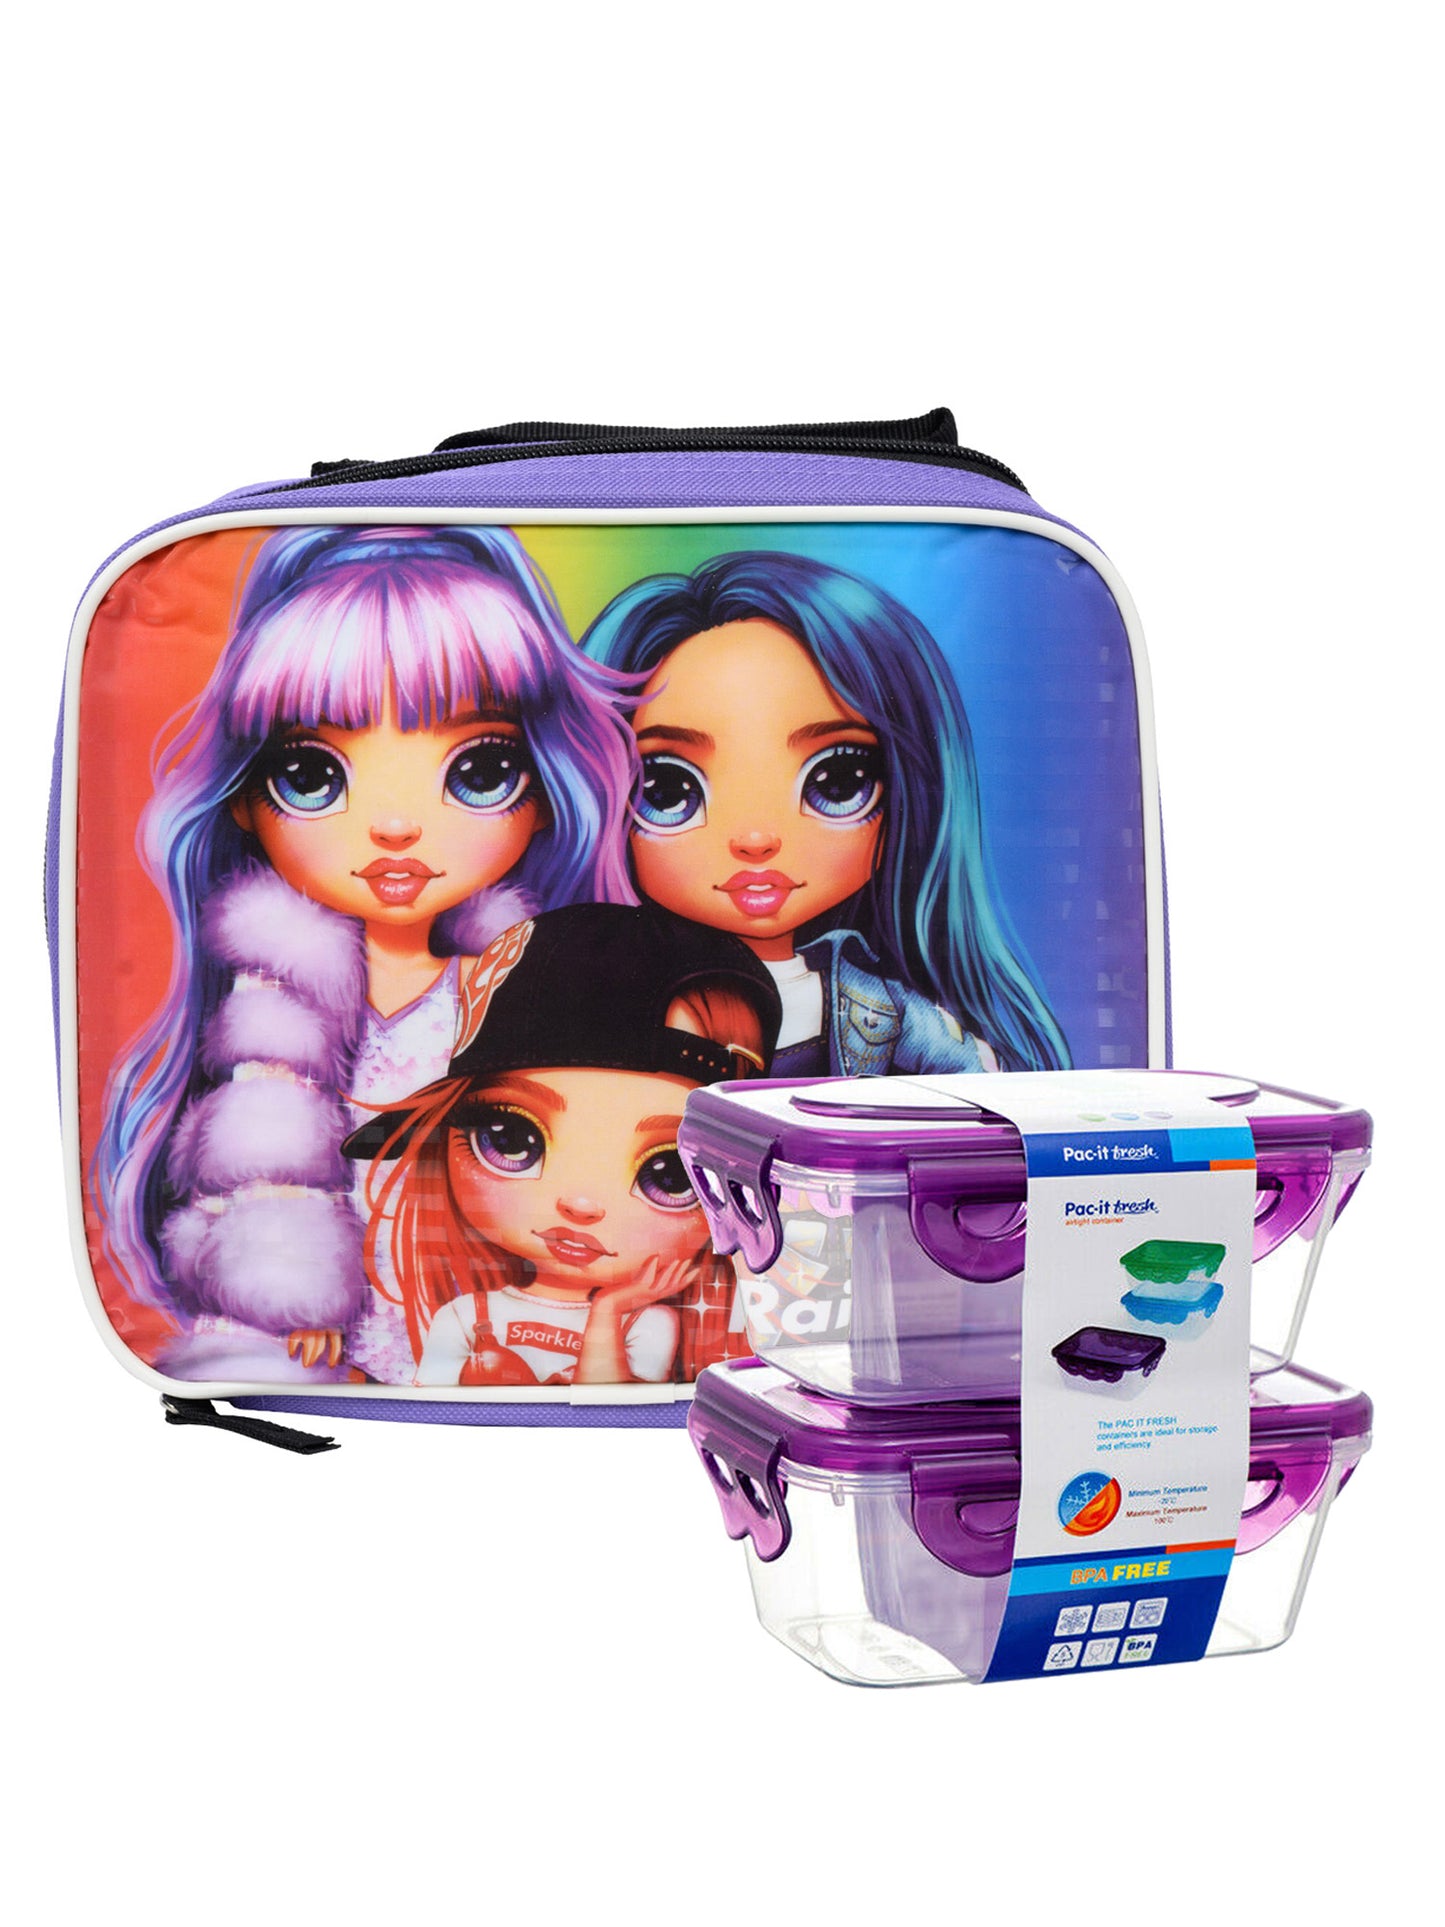 Rainbow High Lunch Bag Insulated w/ Food Container 2Pc Set Girls Purple Pink